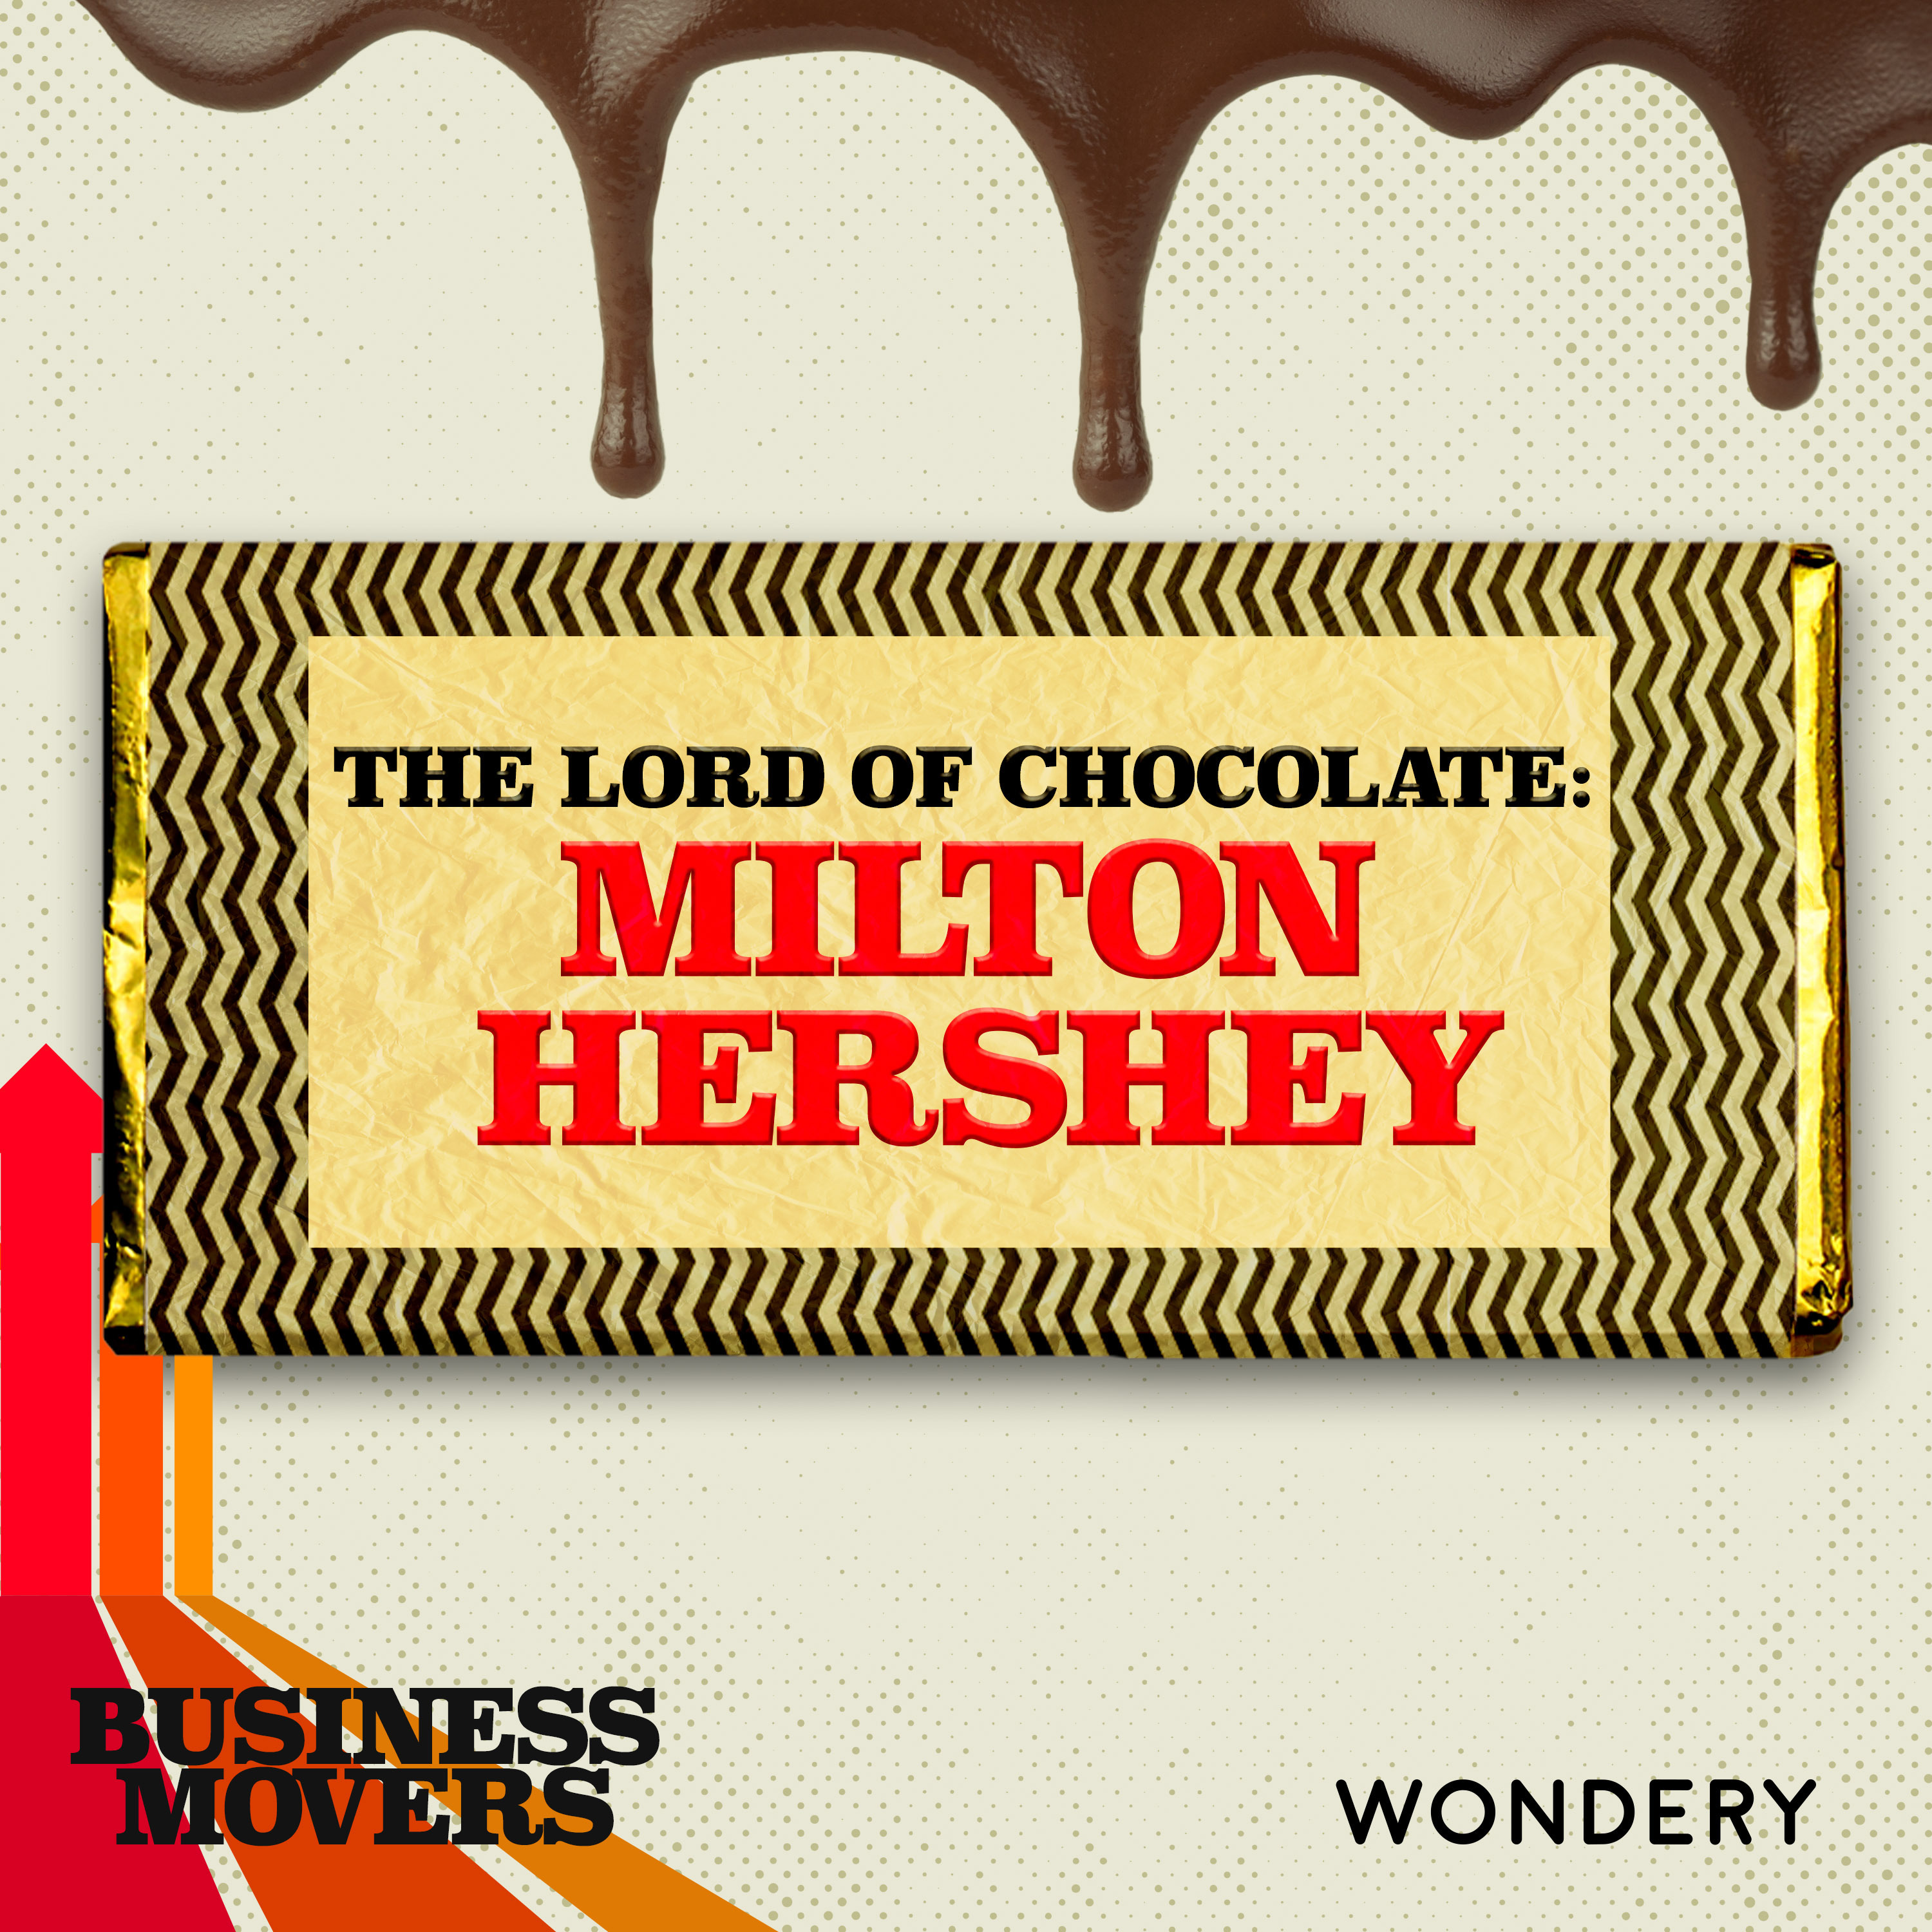 Milton Hershey: The Lord of Chocolate | Author James O’Toole on the Relationship Between Philanthropy and Capitalism | 5